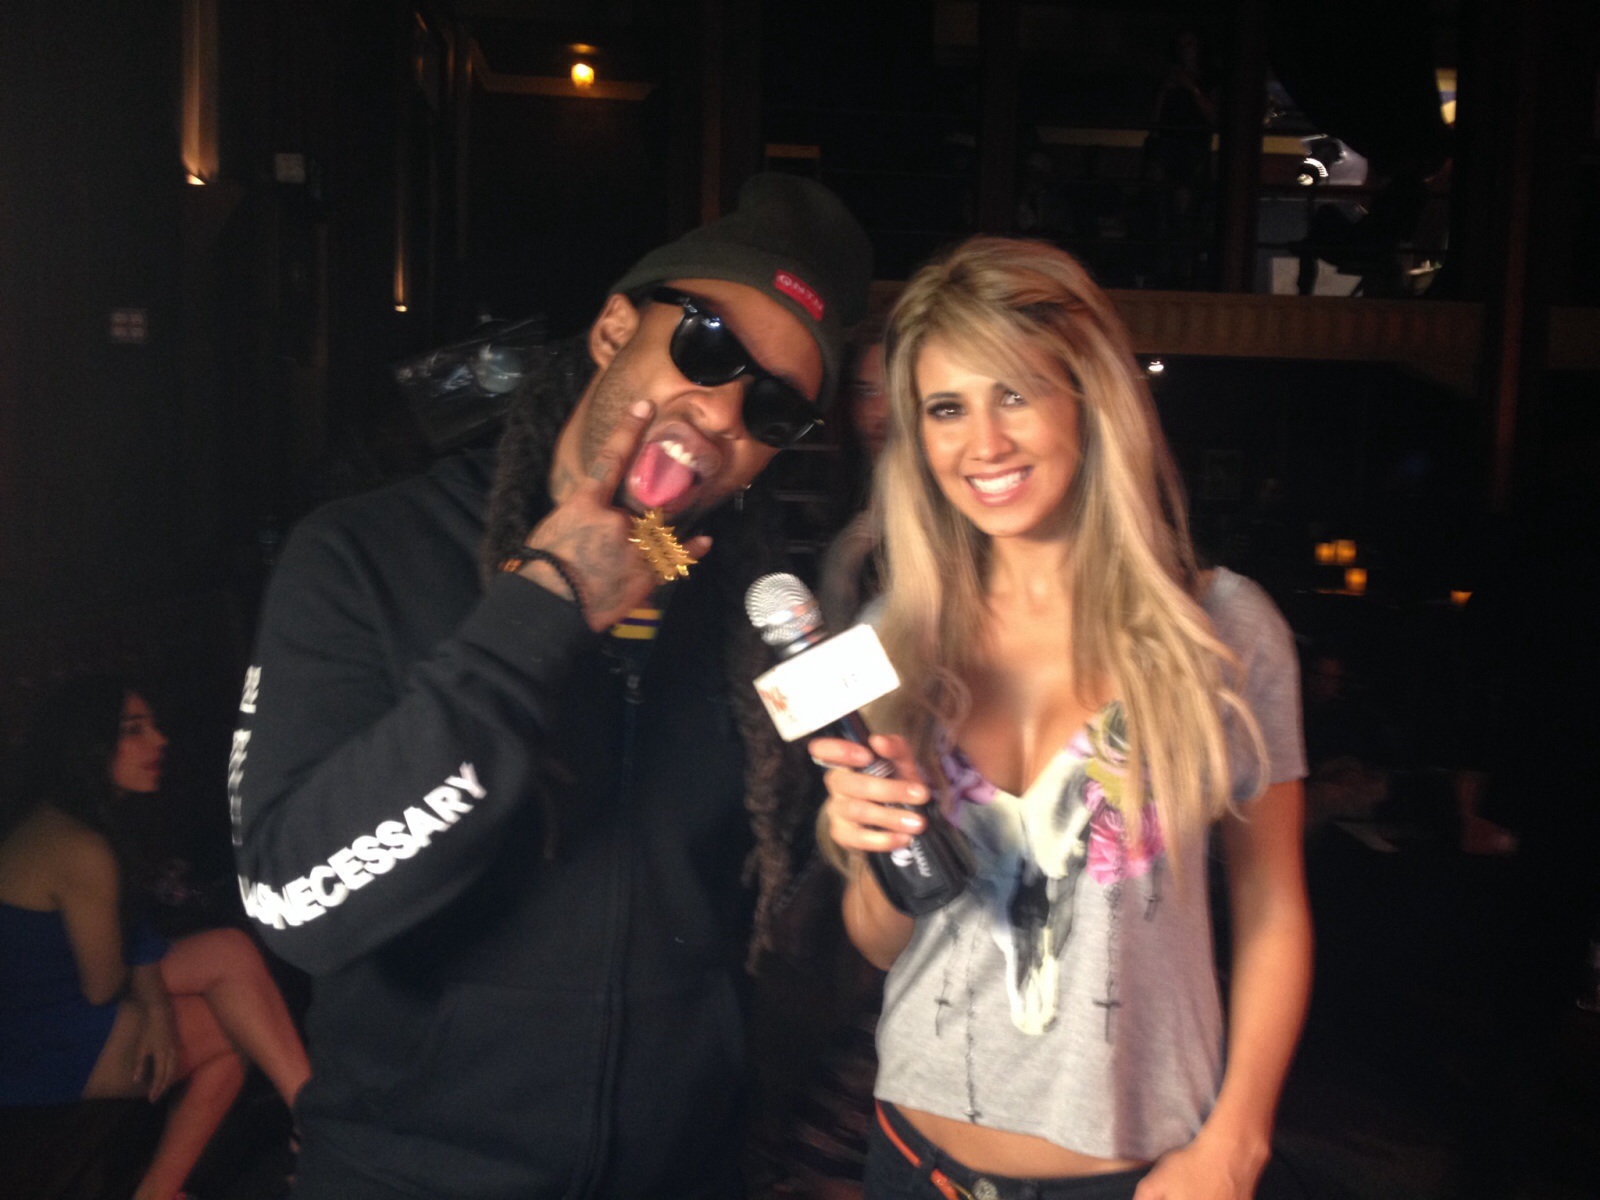 Ty Dollar $ign interview by Leila Ciancaglini from Hollywood Life